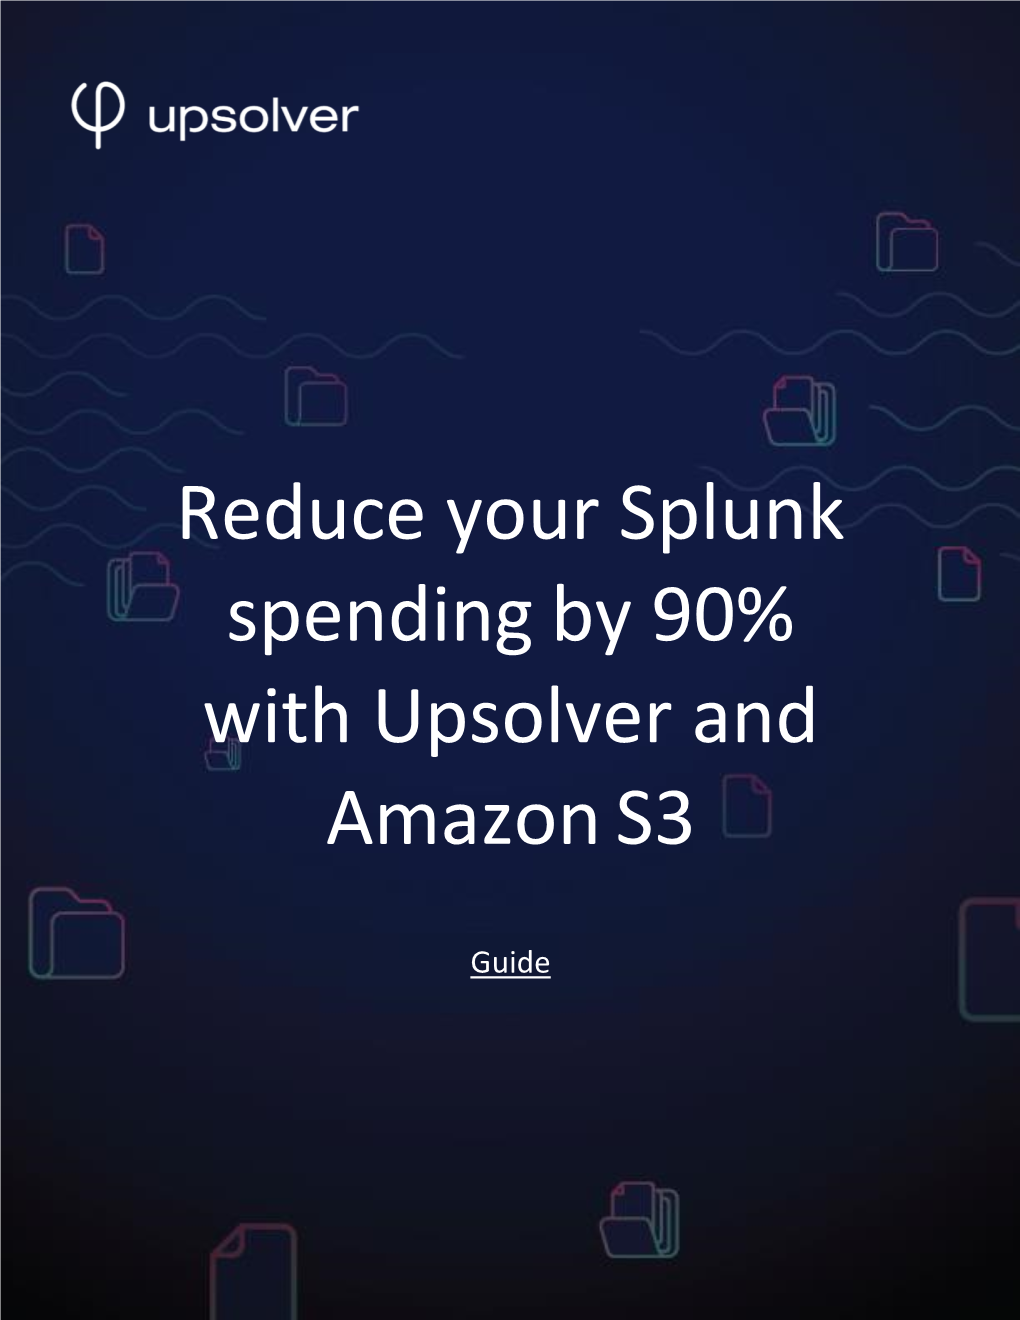 Reduce Your Splunk Spending by 90% with Upsolver and Amazon S3